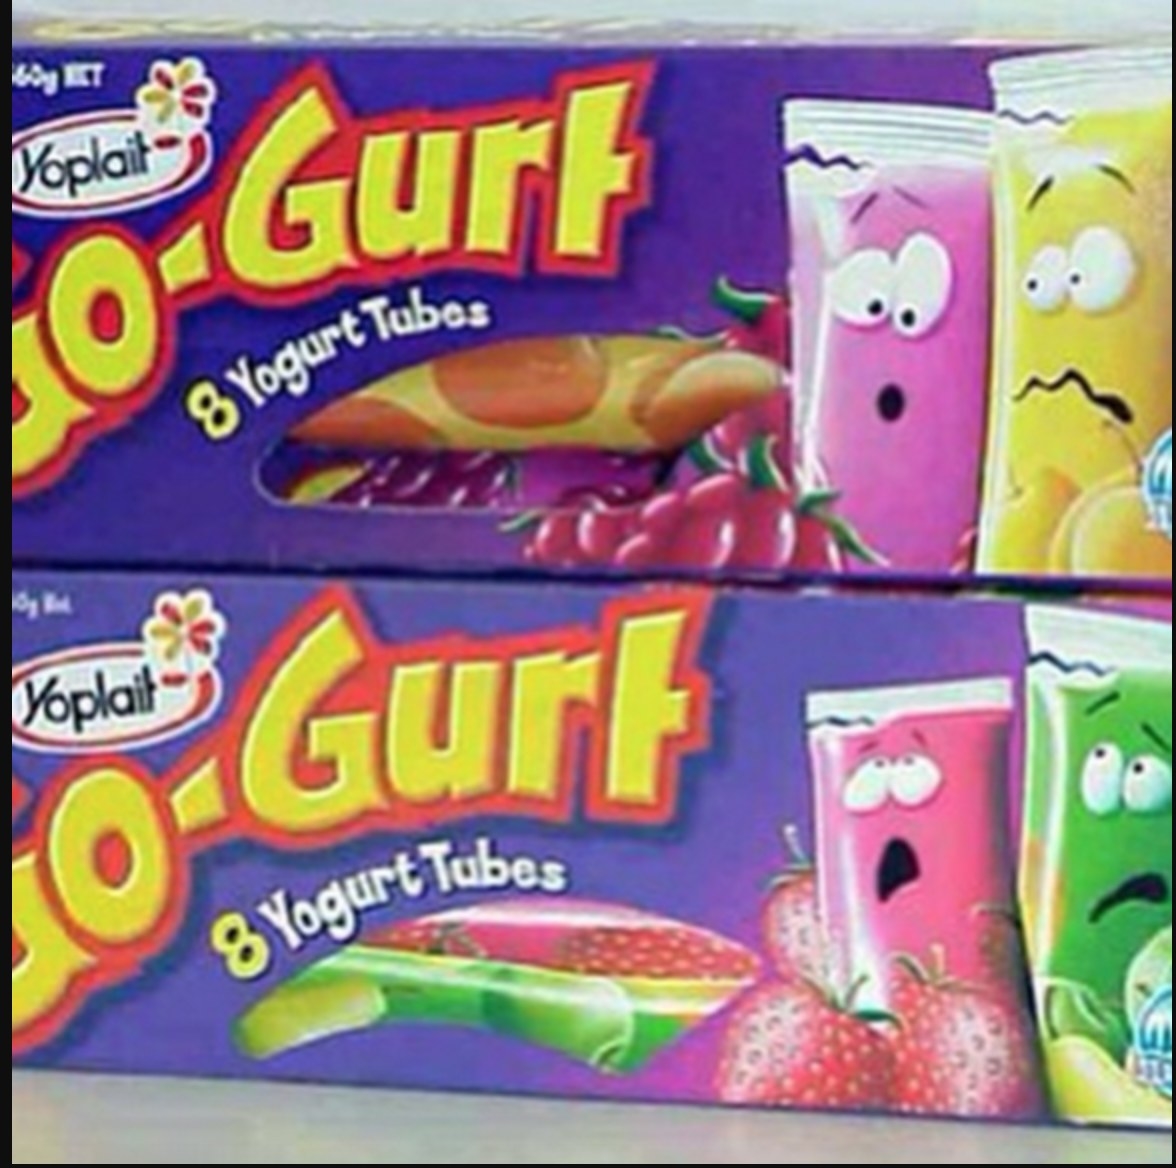 An old fashioned box of Go-Gurts